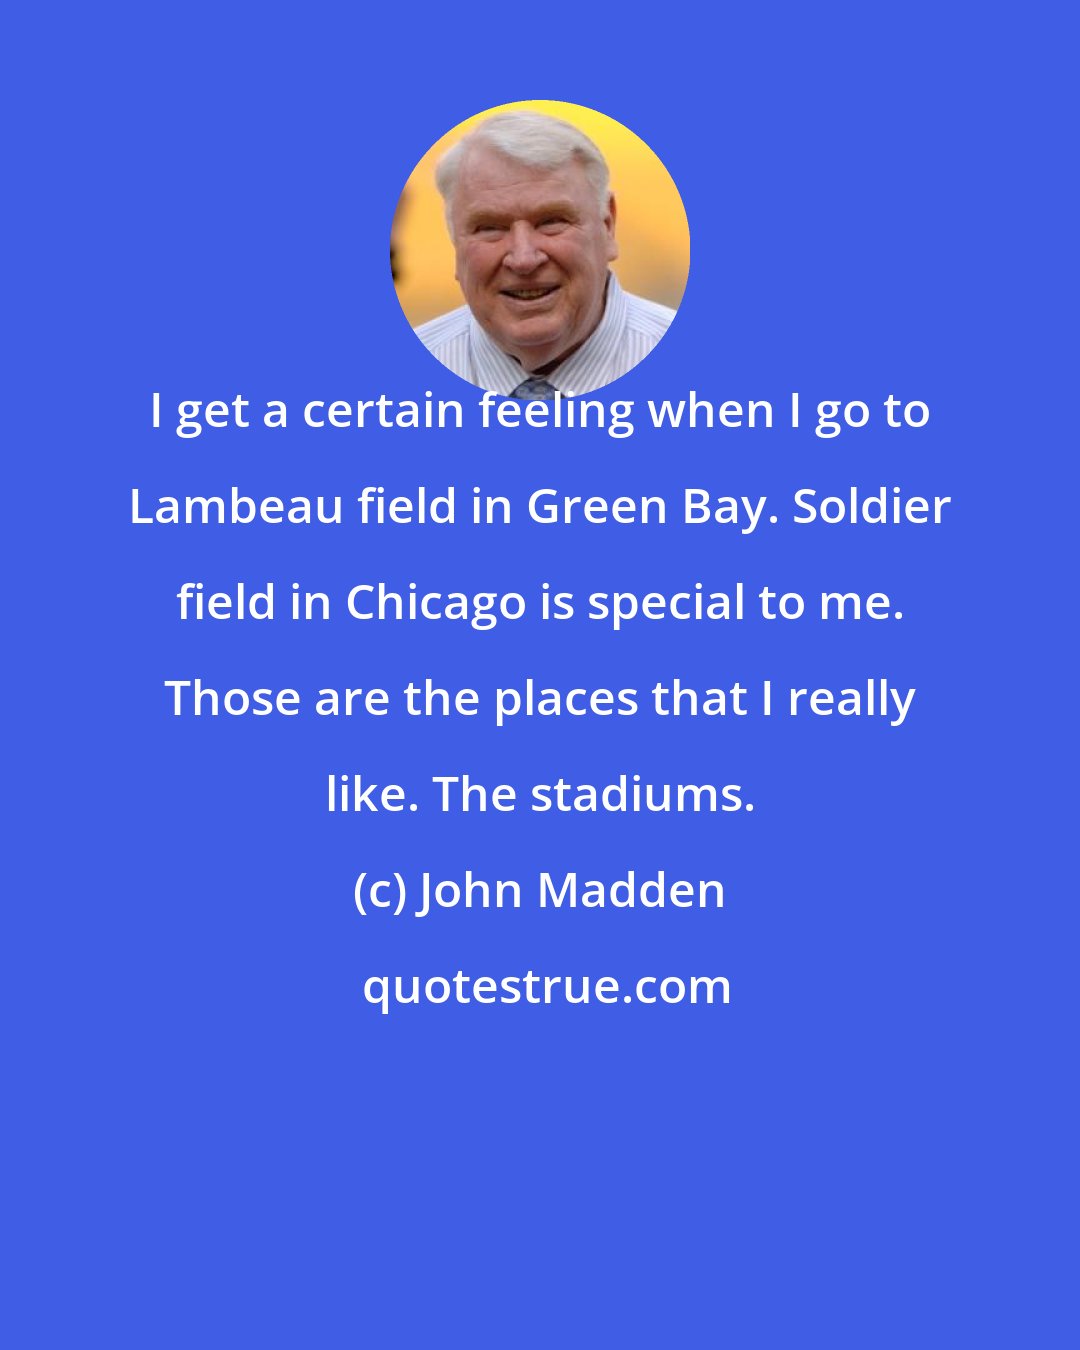 John Madden: I get a certain feeling when I go to Lambeau field in Green Bay. Soldier field in Chicago is special to me. Those are the places that I really like. The stadiums.